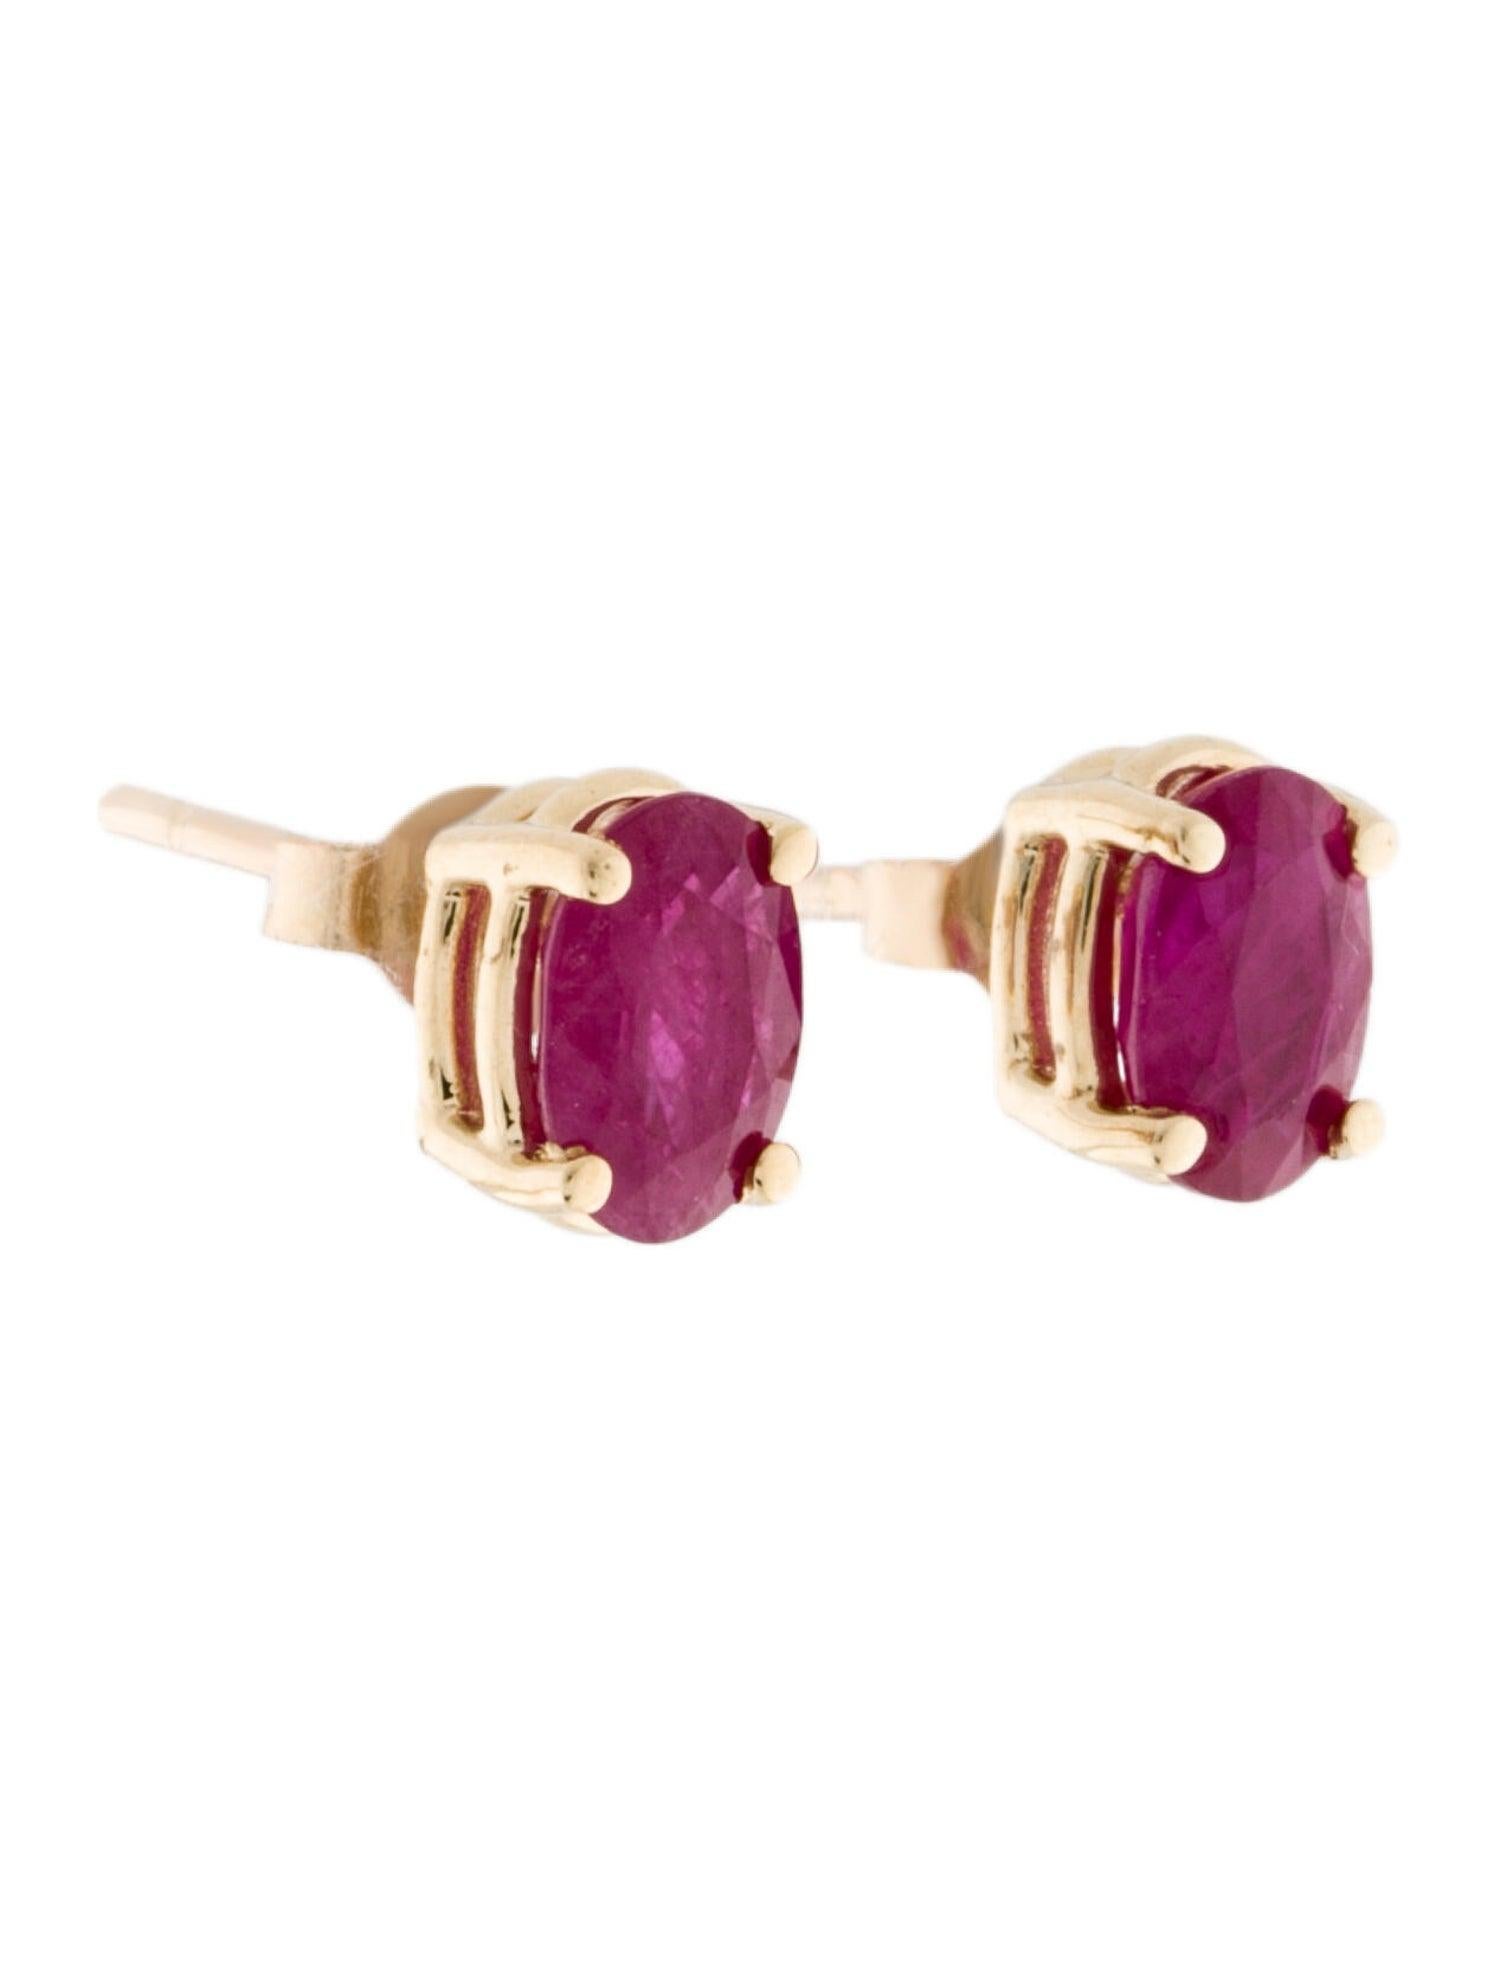 14 Karat Yellow Gold 1.11 Carat Red Ruby Oval Shape Stud Earrings In New Condition For Sale In Great neck, NY